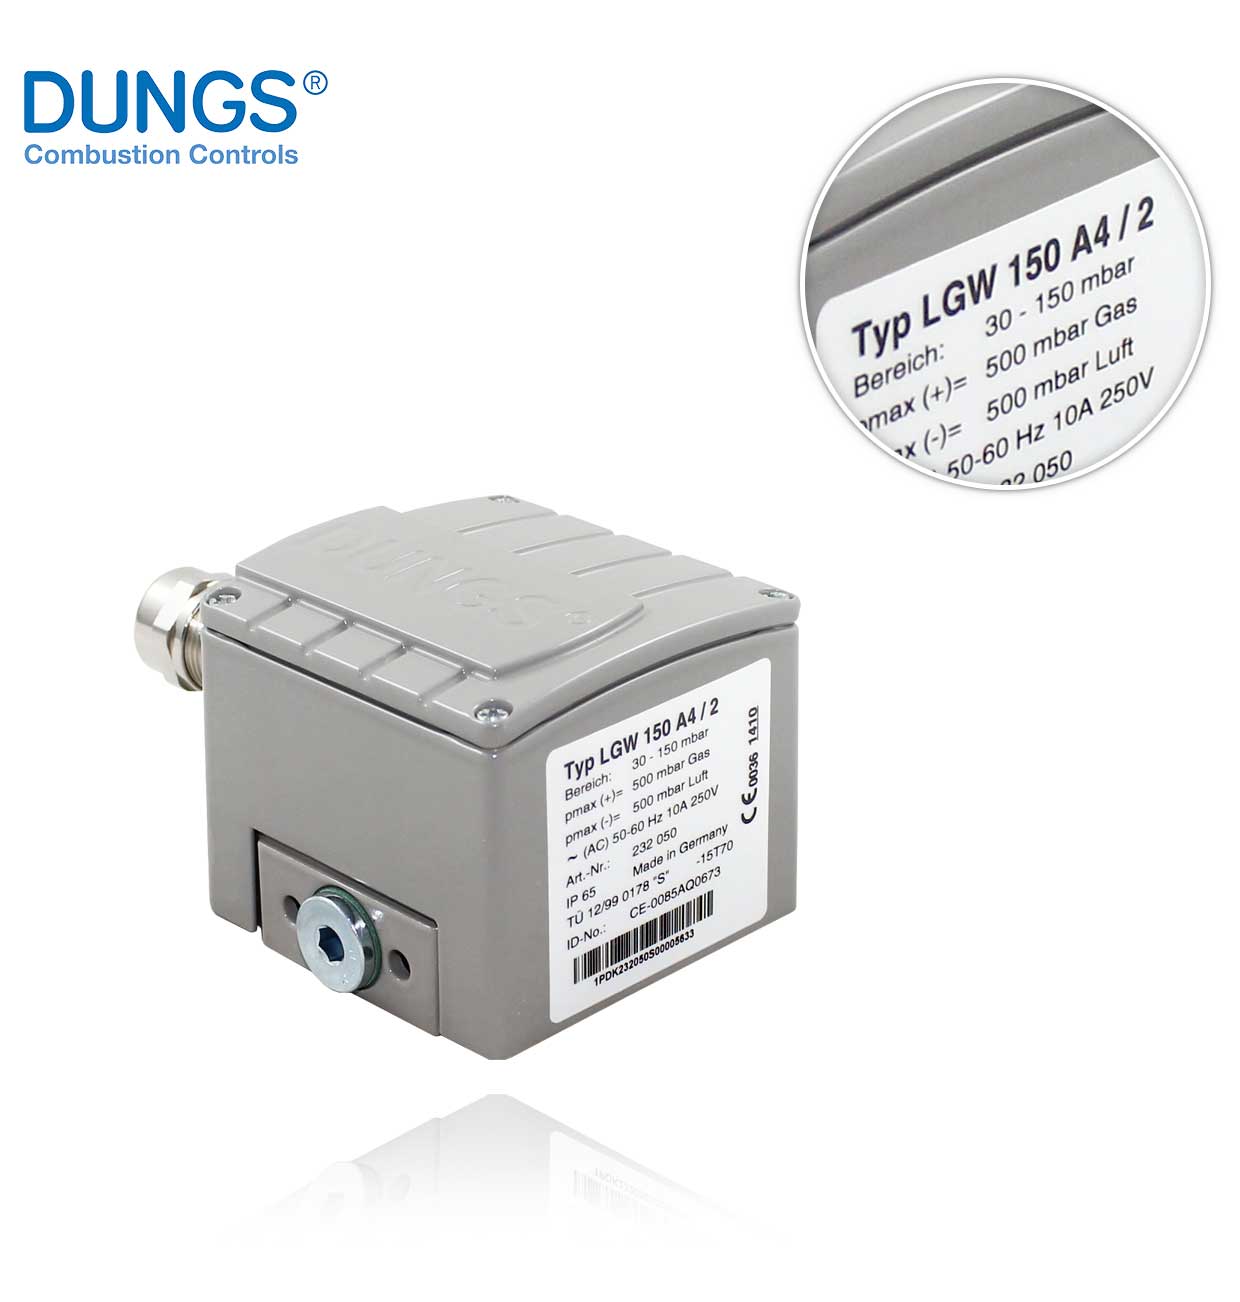 LGW 150 A4/2 IP65 DUNGS PRESSURE SWITCH